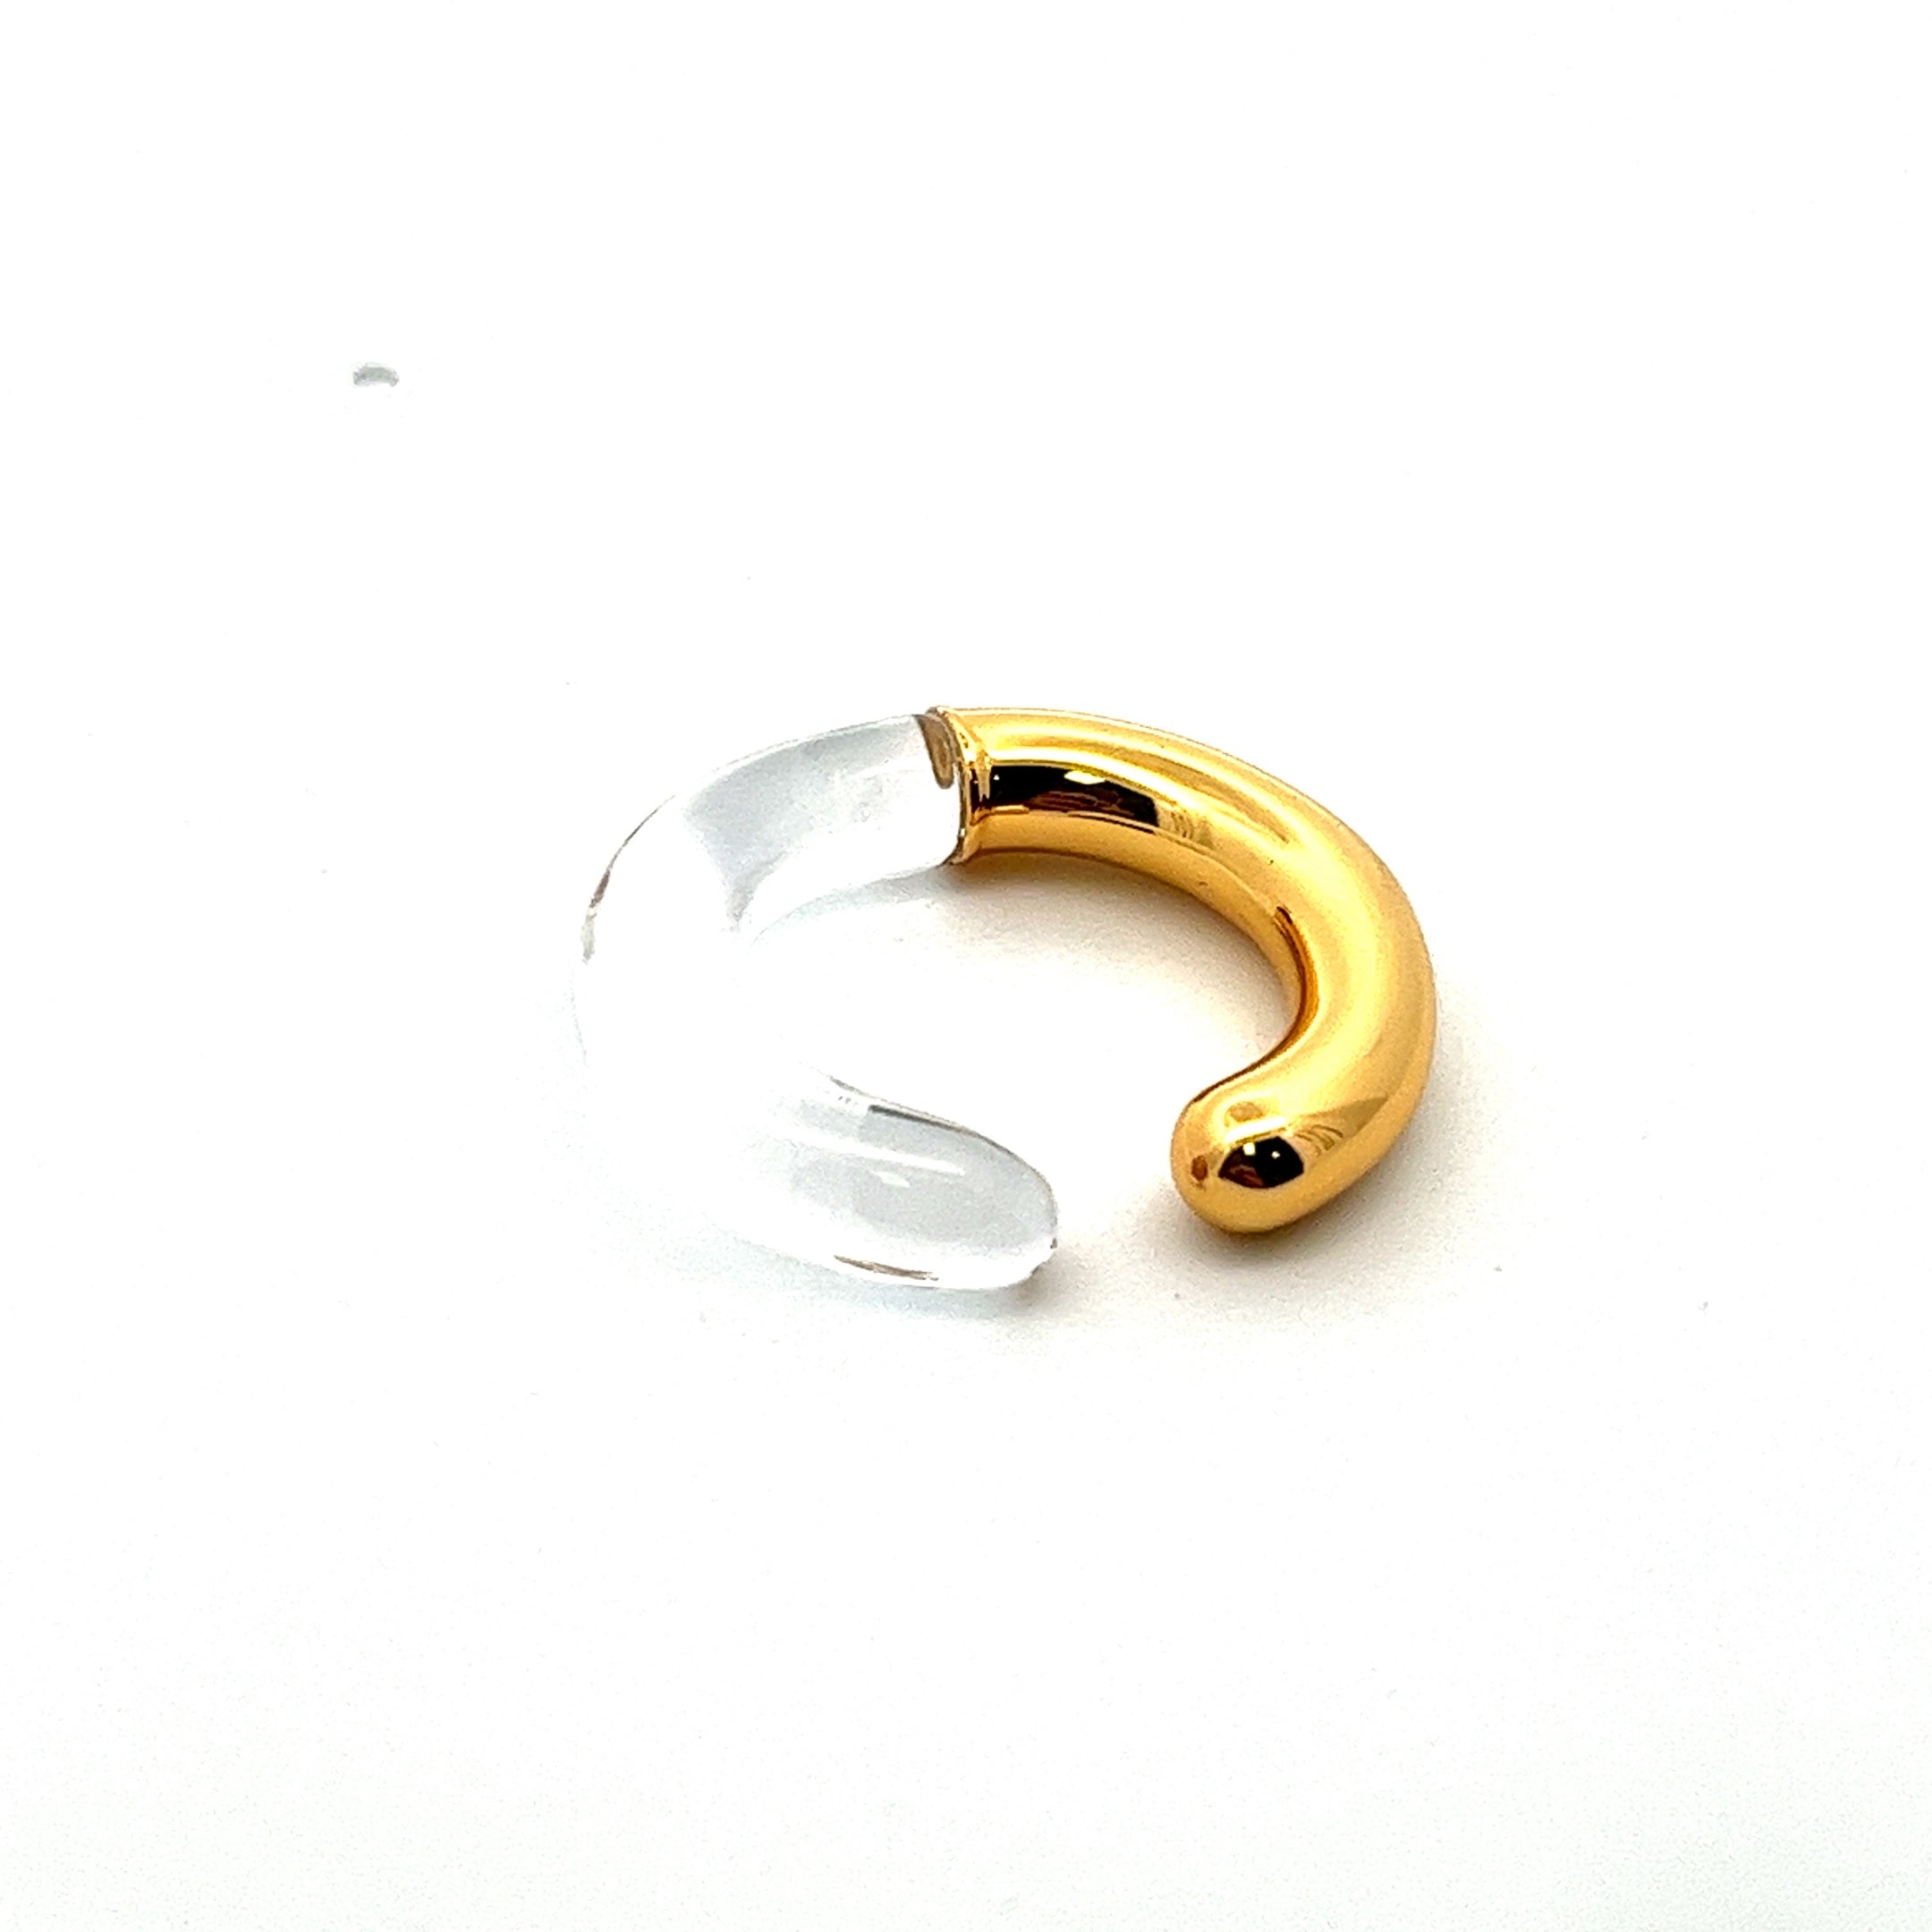 METAL BASE GOLD AND CLEAR EAR CUFF